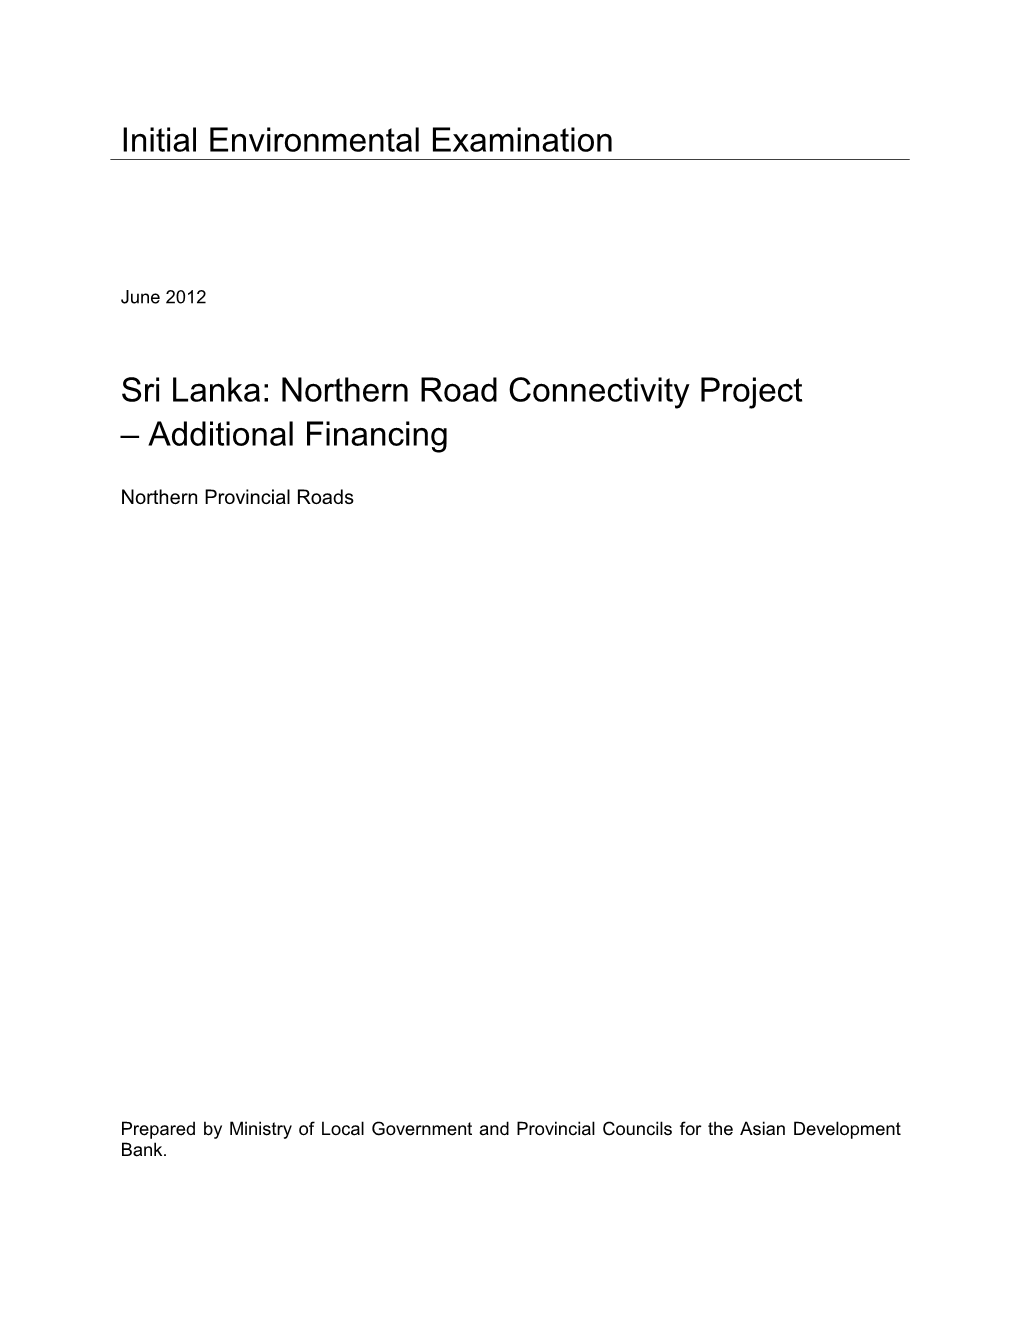 Sri Lanka: Northern Road Connectivity Project – Additional Financing